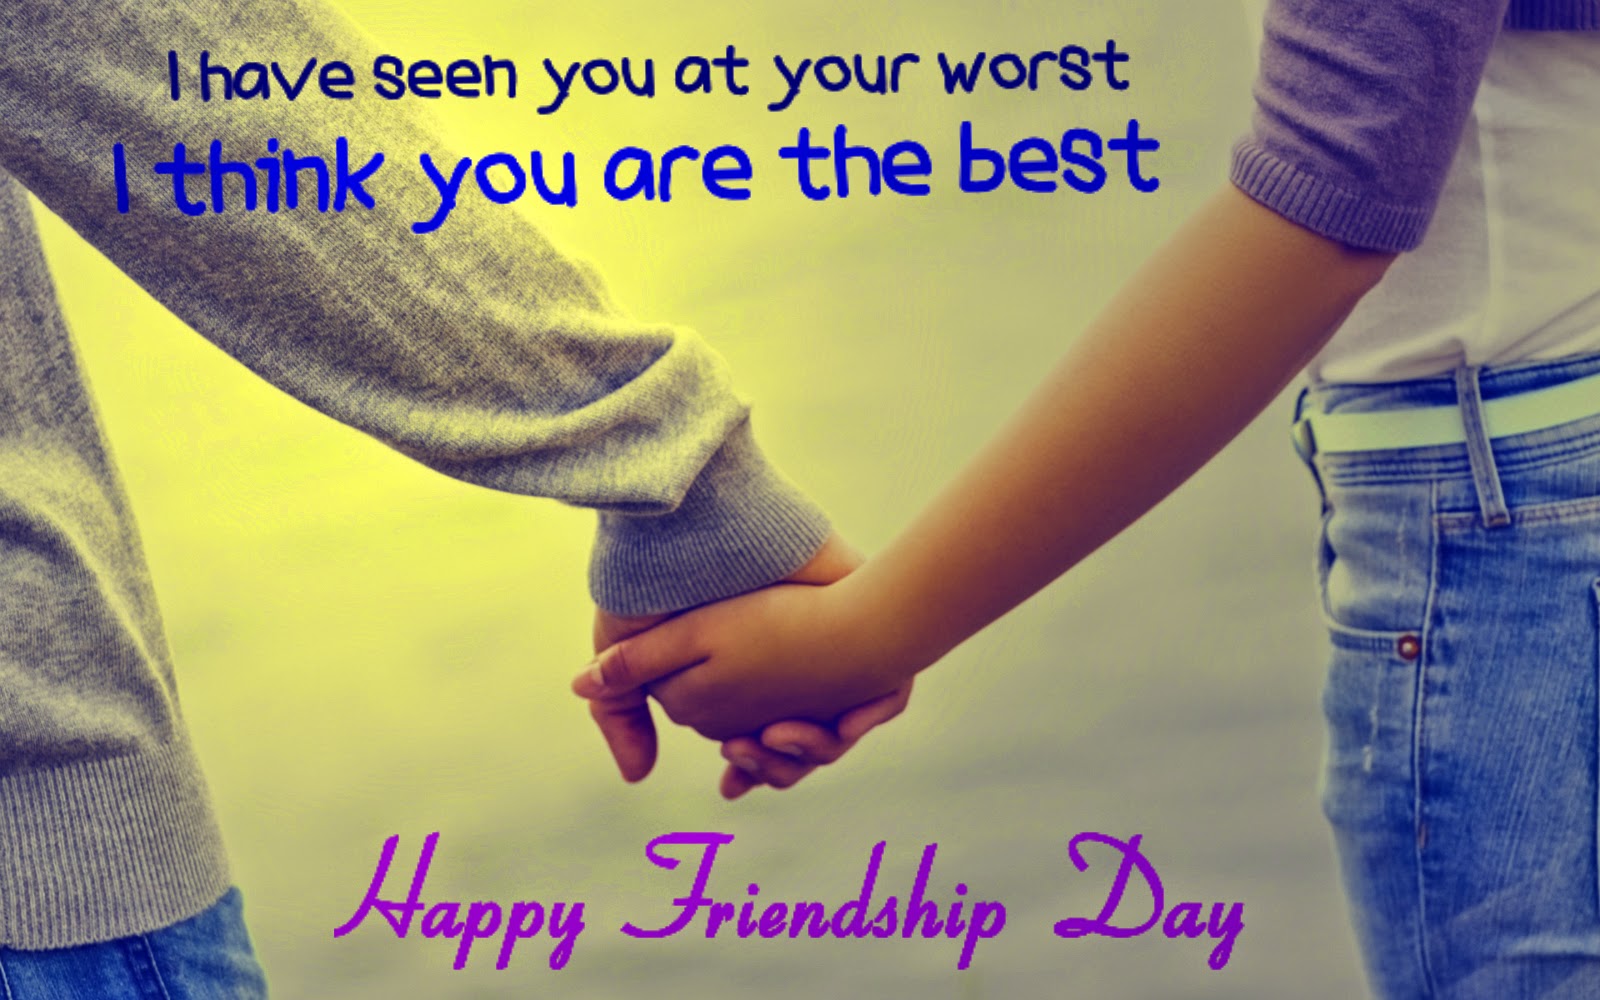 Happy Friendship Day Wishes and Messages for friends